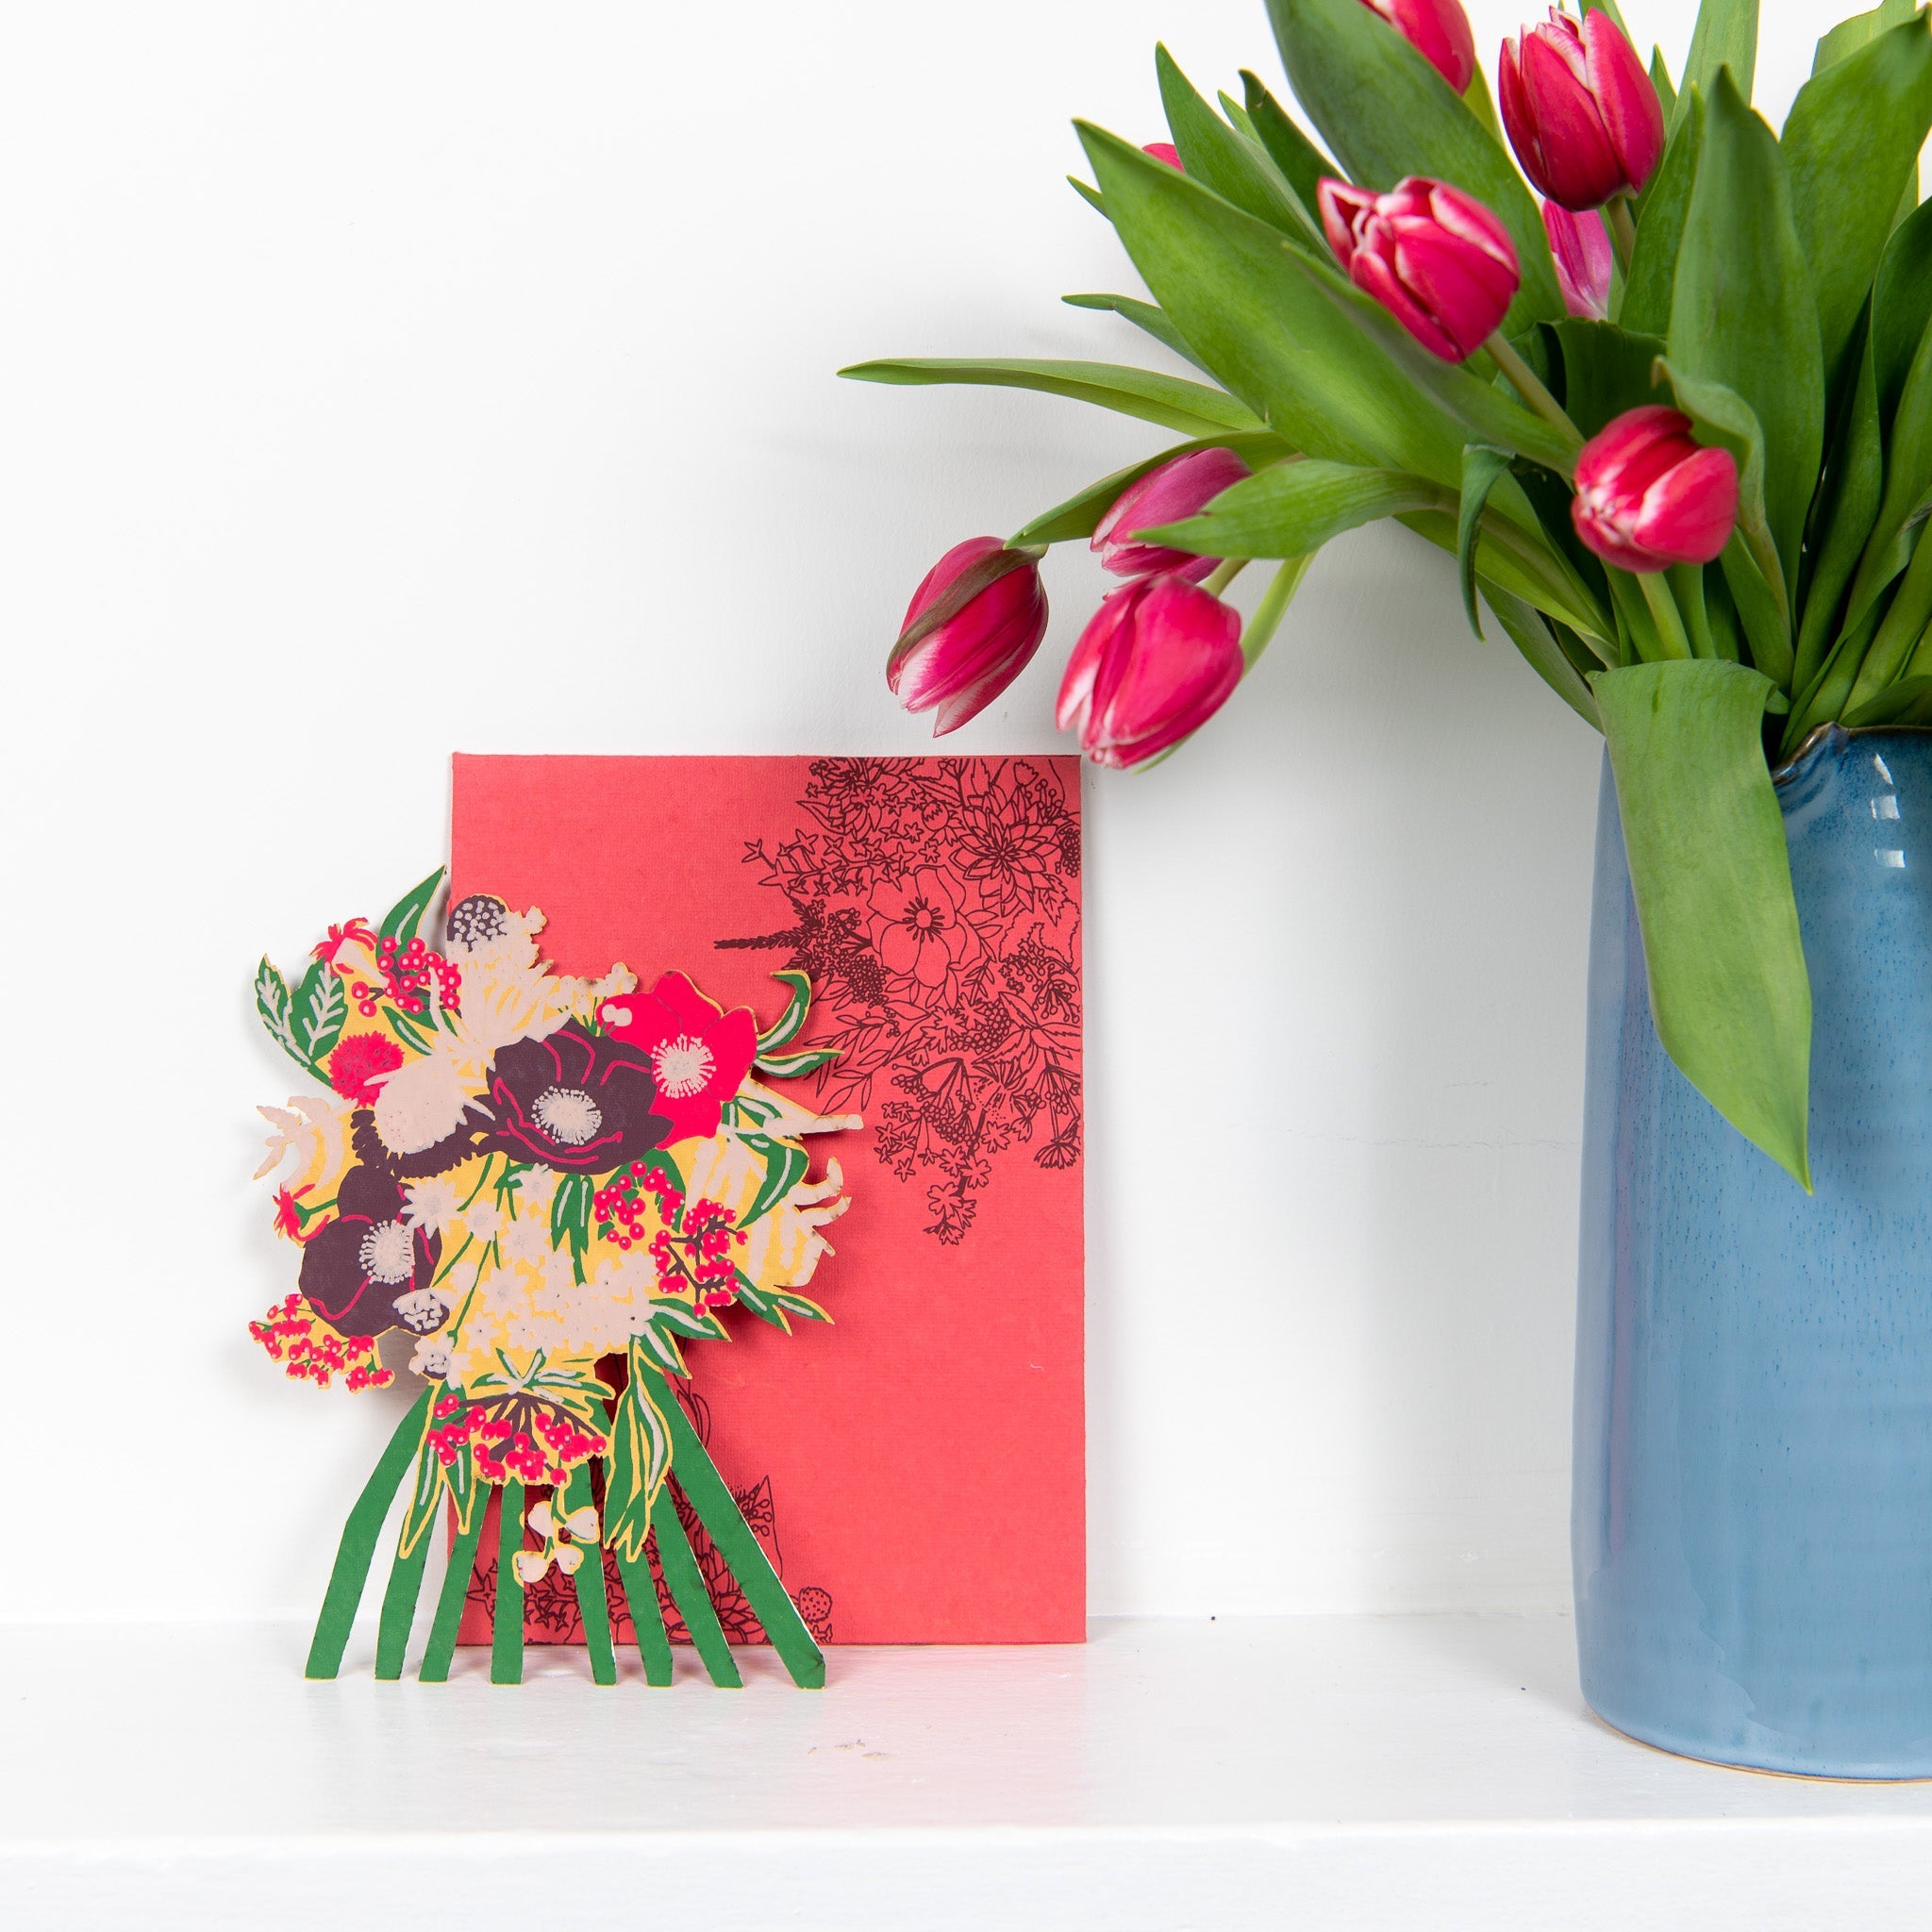 EAST END PRESS GREETING CARD Peony Bouquet